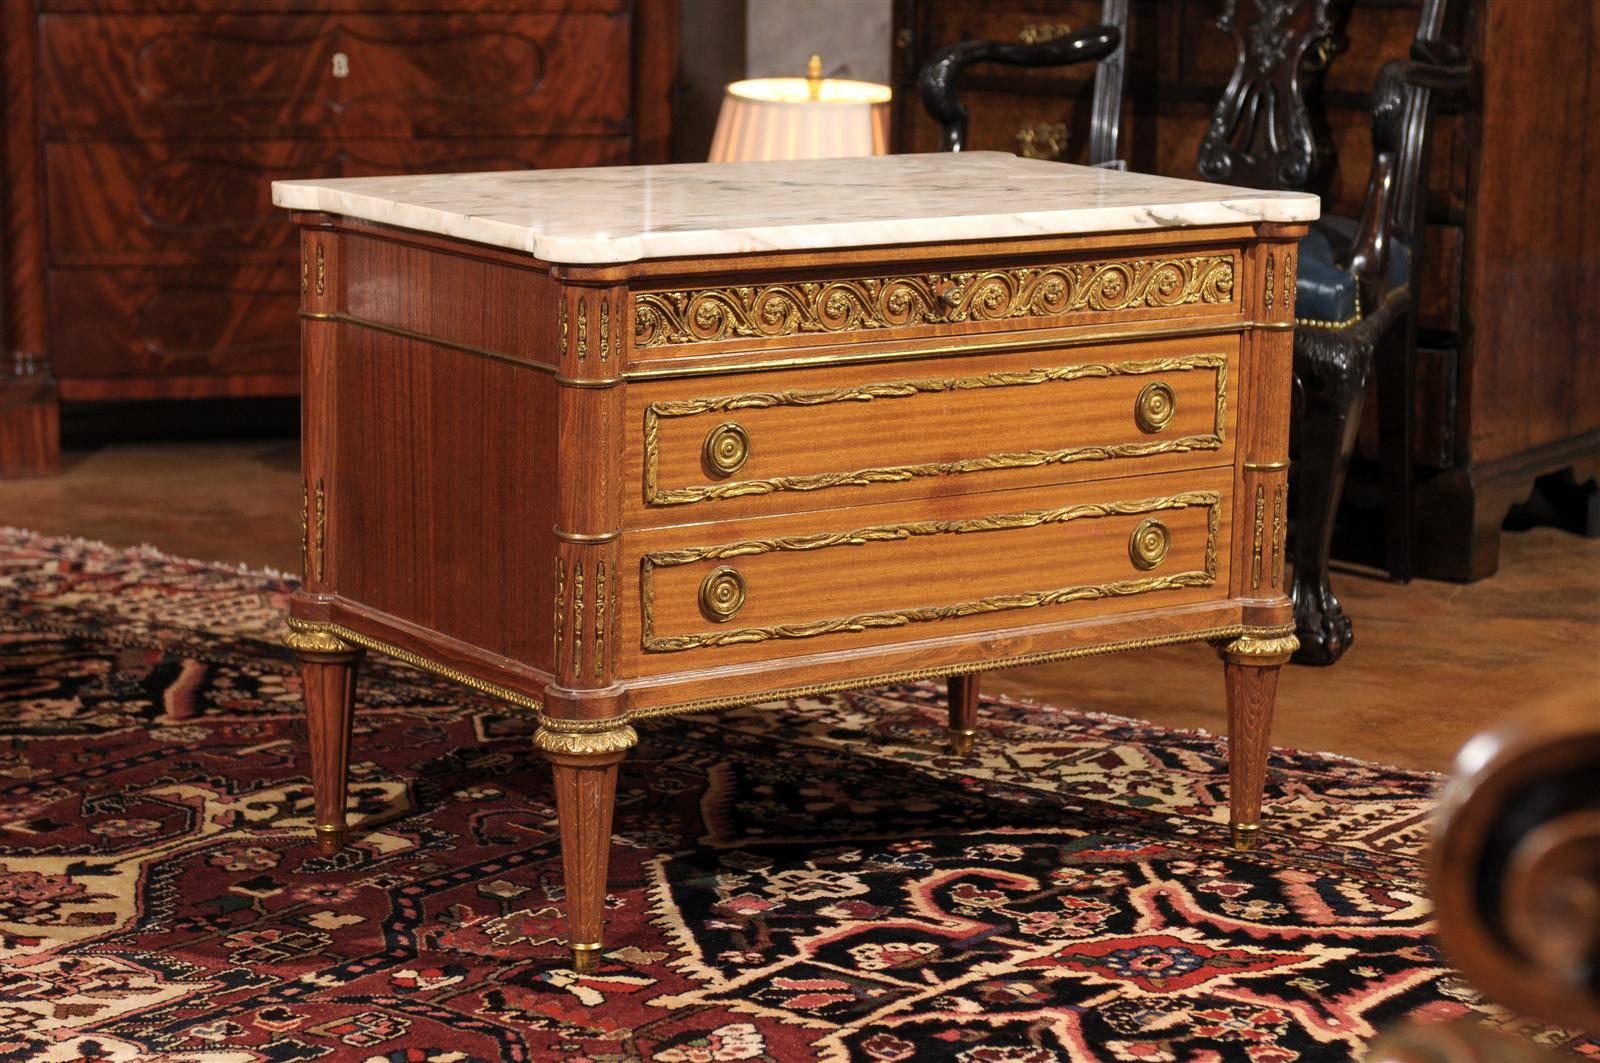 This is a beautiful Louis XVI style petite commode, vintage 1930s. The detailed work of the bronze ormolu is gorgeous. The top drawer is not as deep as the other two drawers and the bronze swirls like waves move completely across the facade this